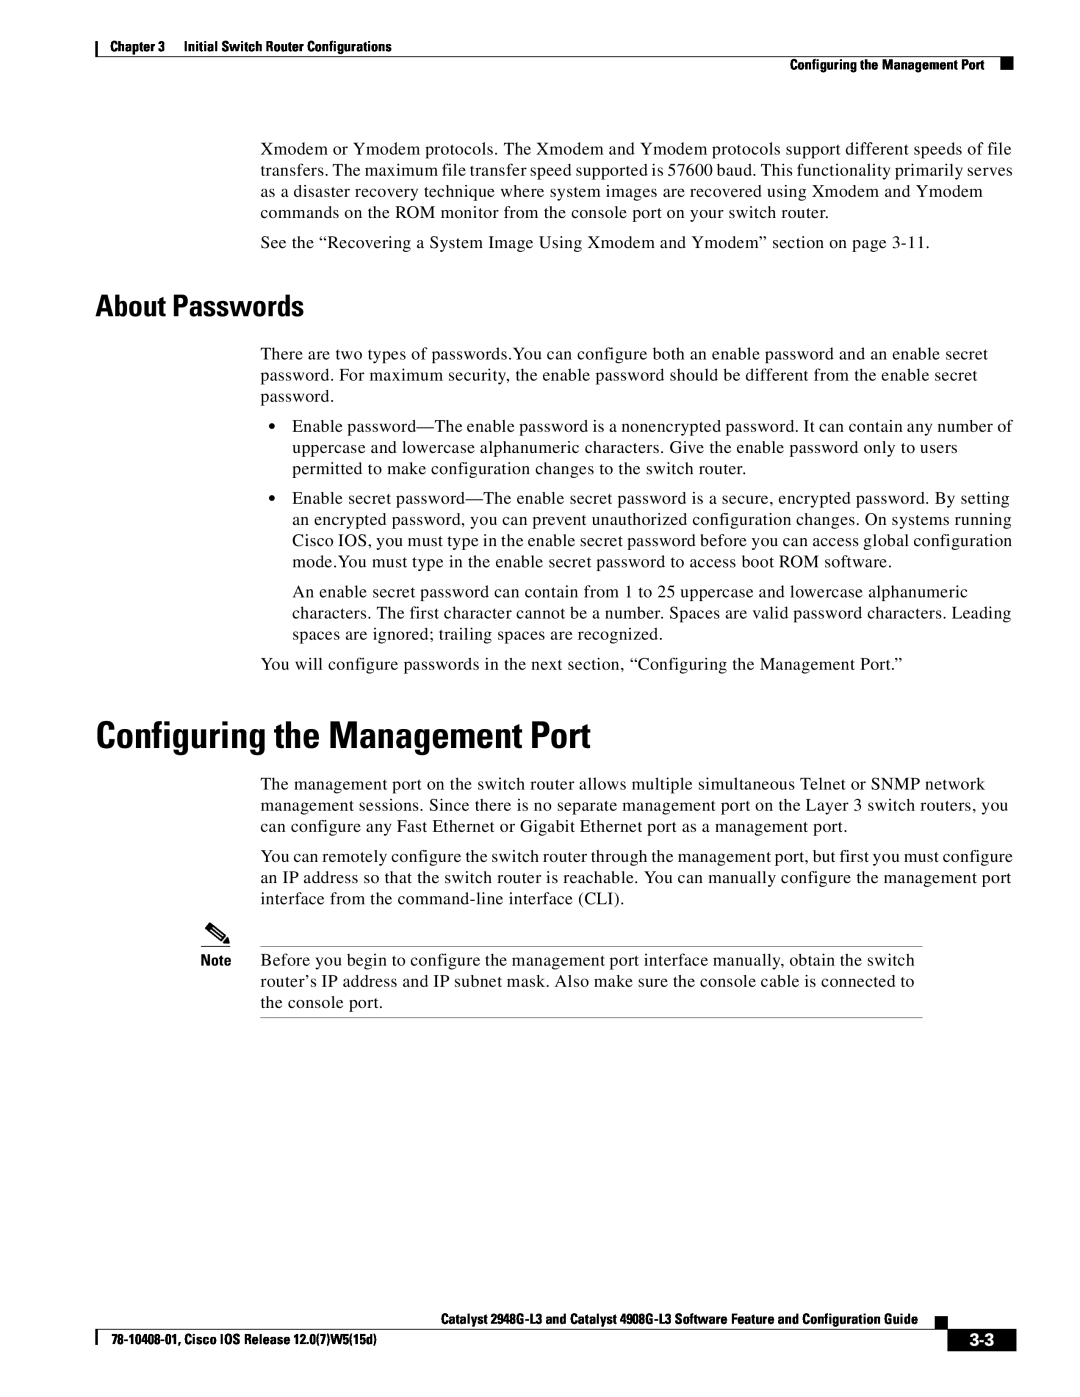 Cisco Systems 3 manual Configuring the Management Port, About Passwords 